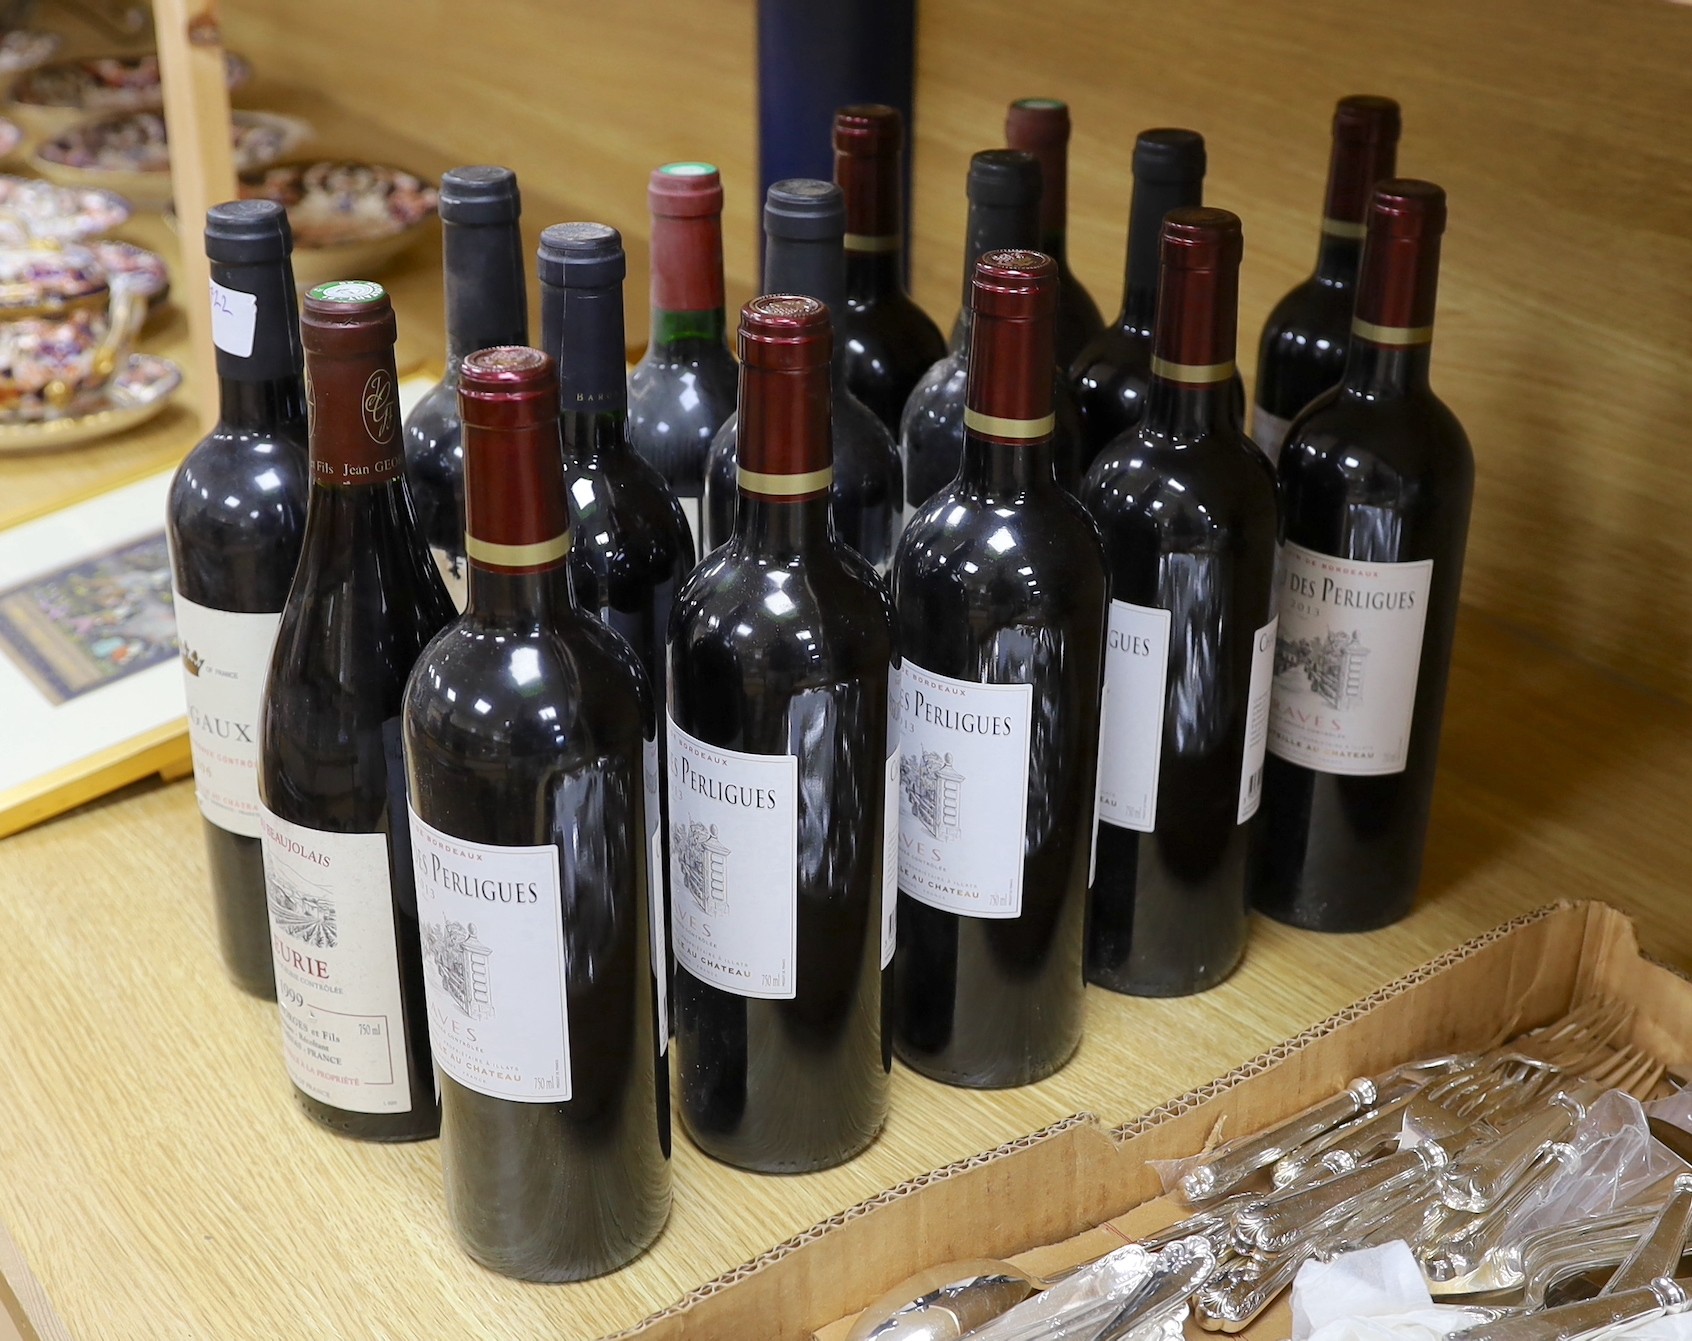 16 various bottles of red wine to include 7 bottles of Chateau des Perligues 2013, 5 bottles of Margaux 2006, etc.